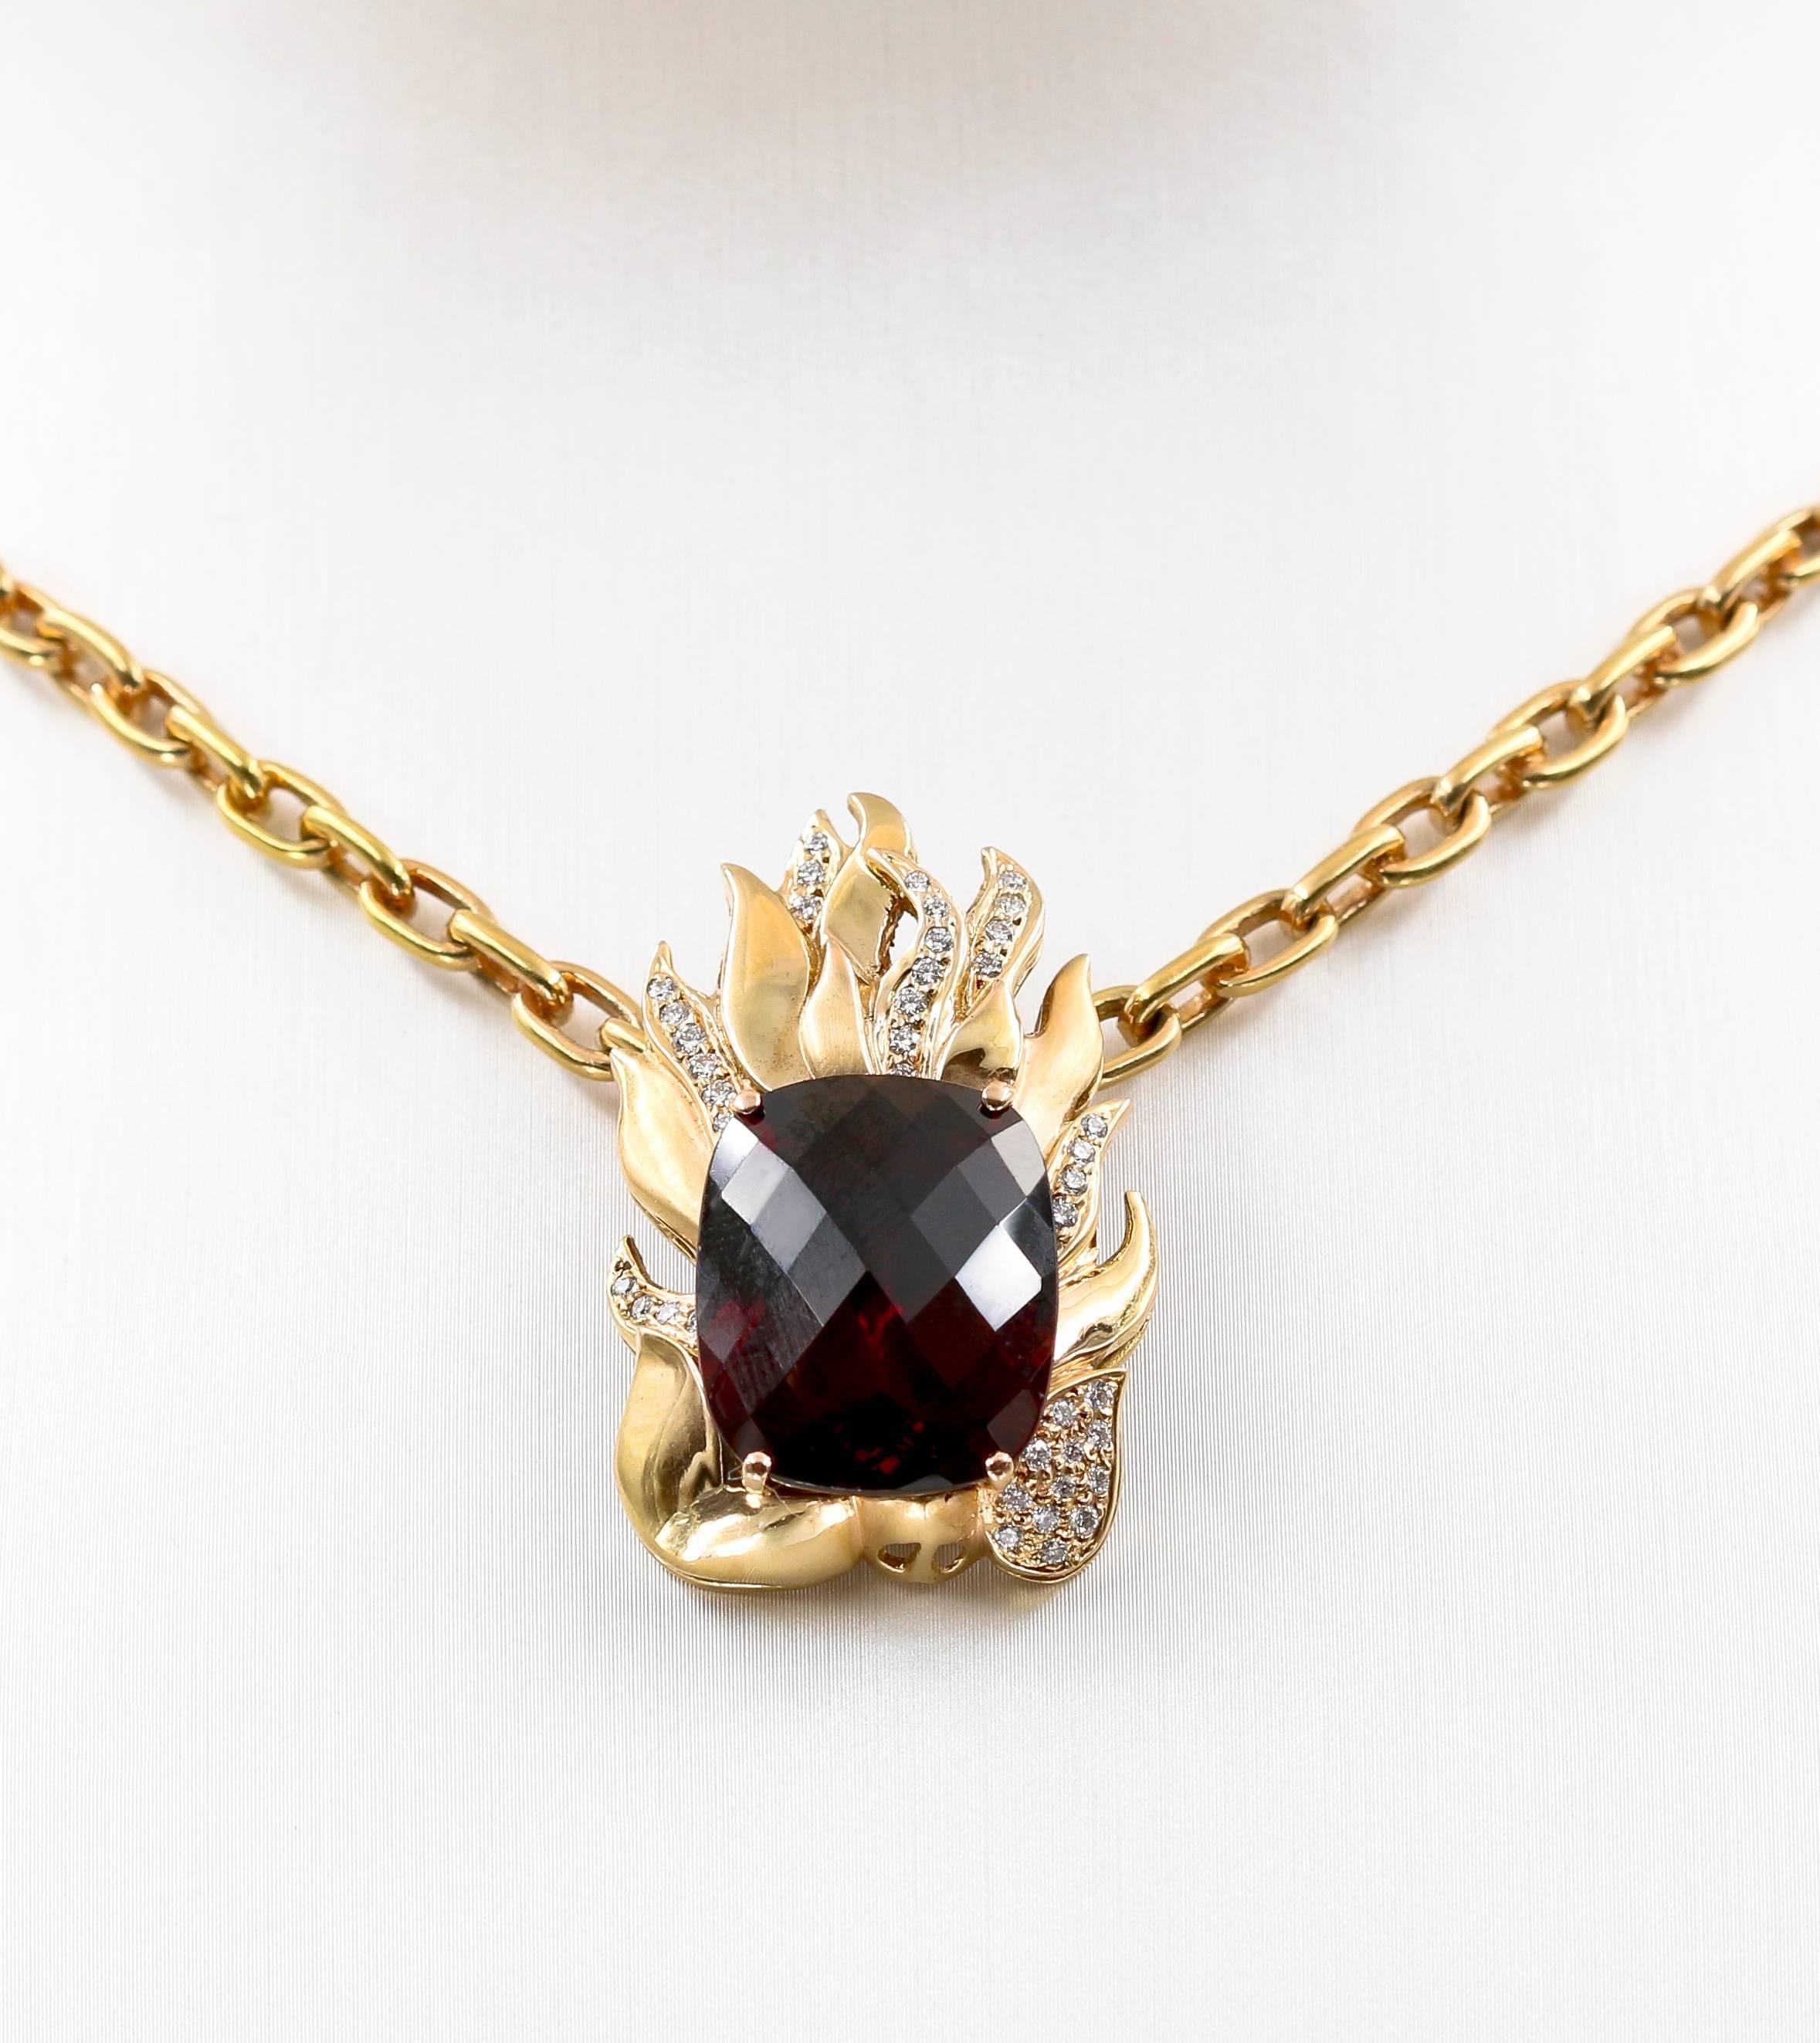 Extraordinary 21.39 Carat Natural Rhodolite and Diamond Necklace For Sale 3